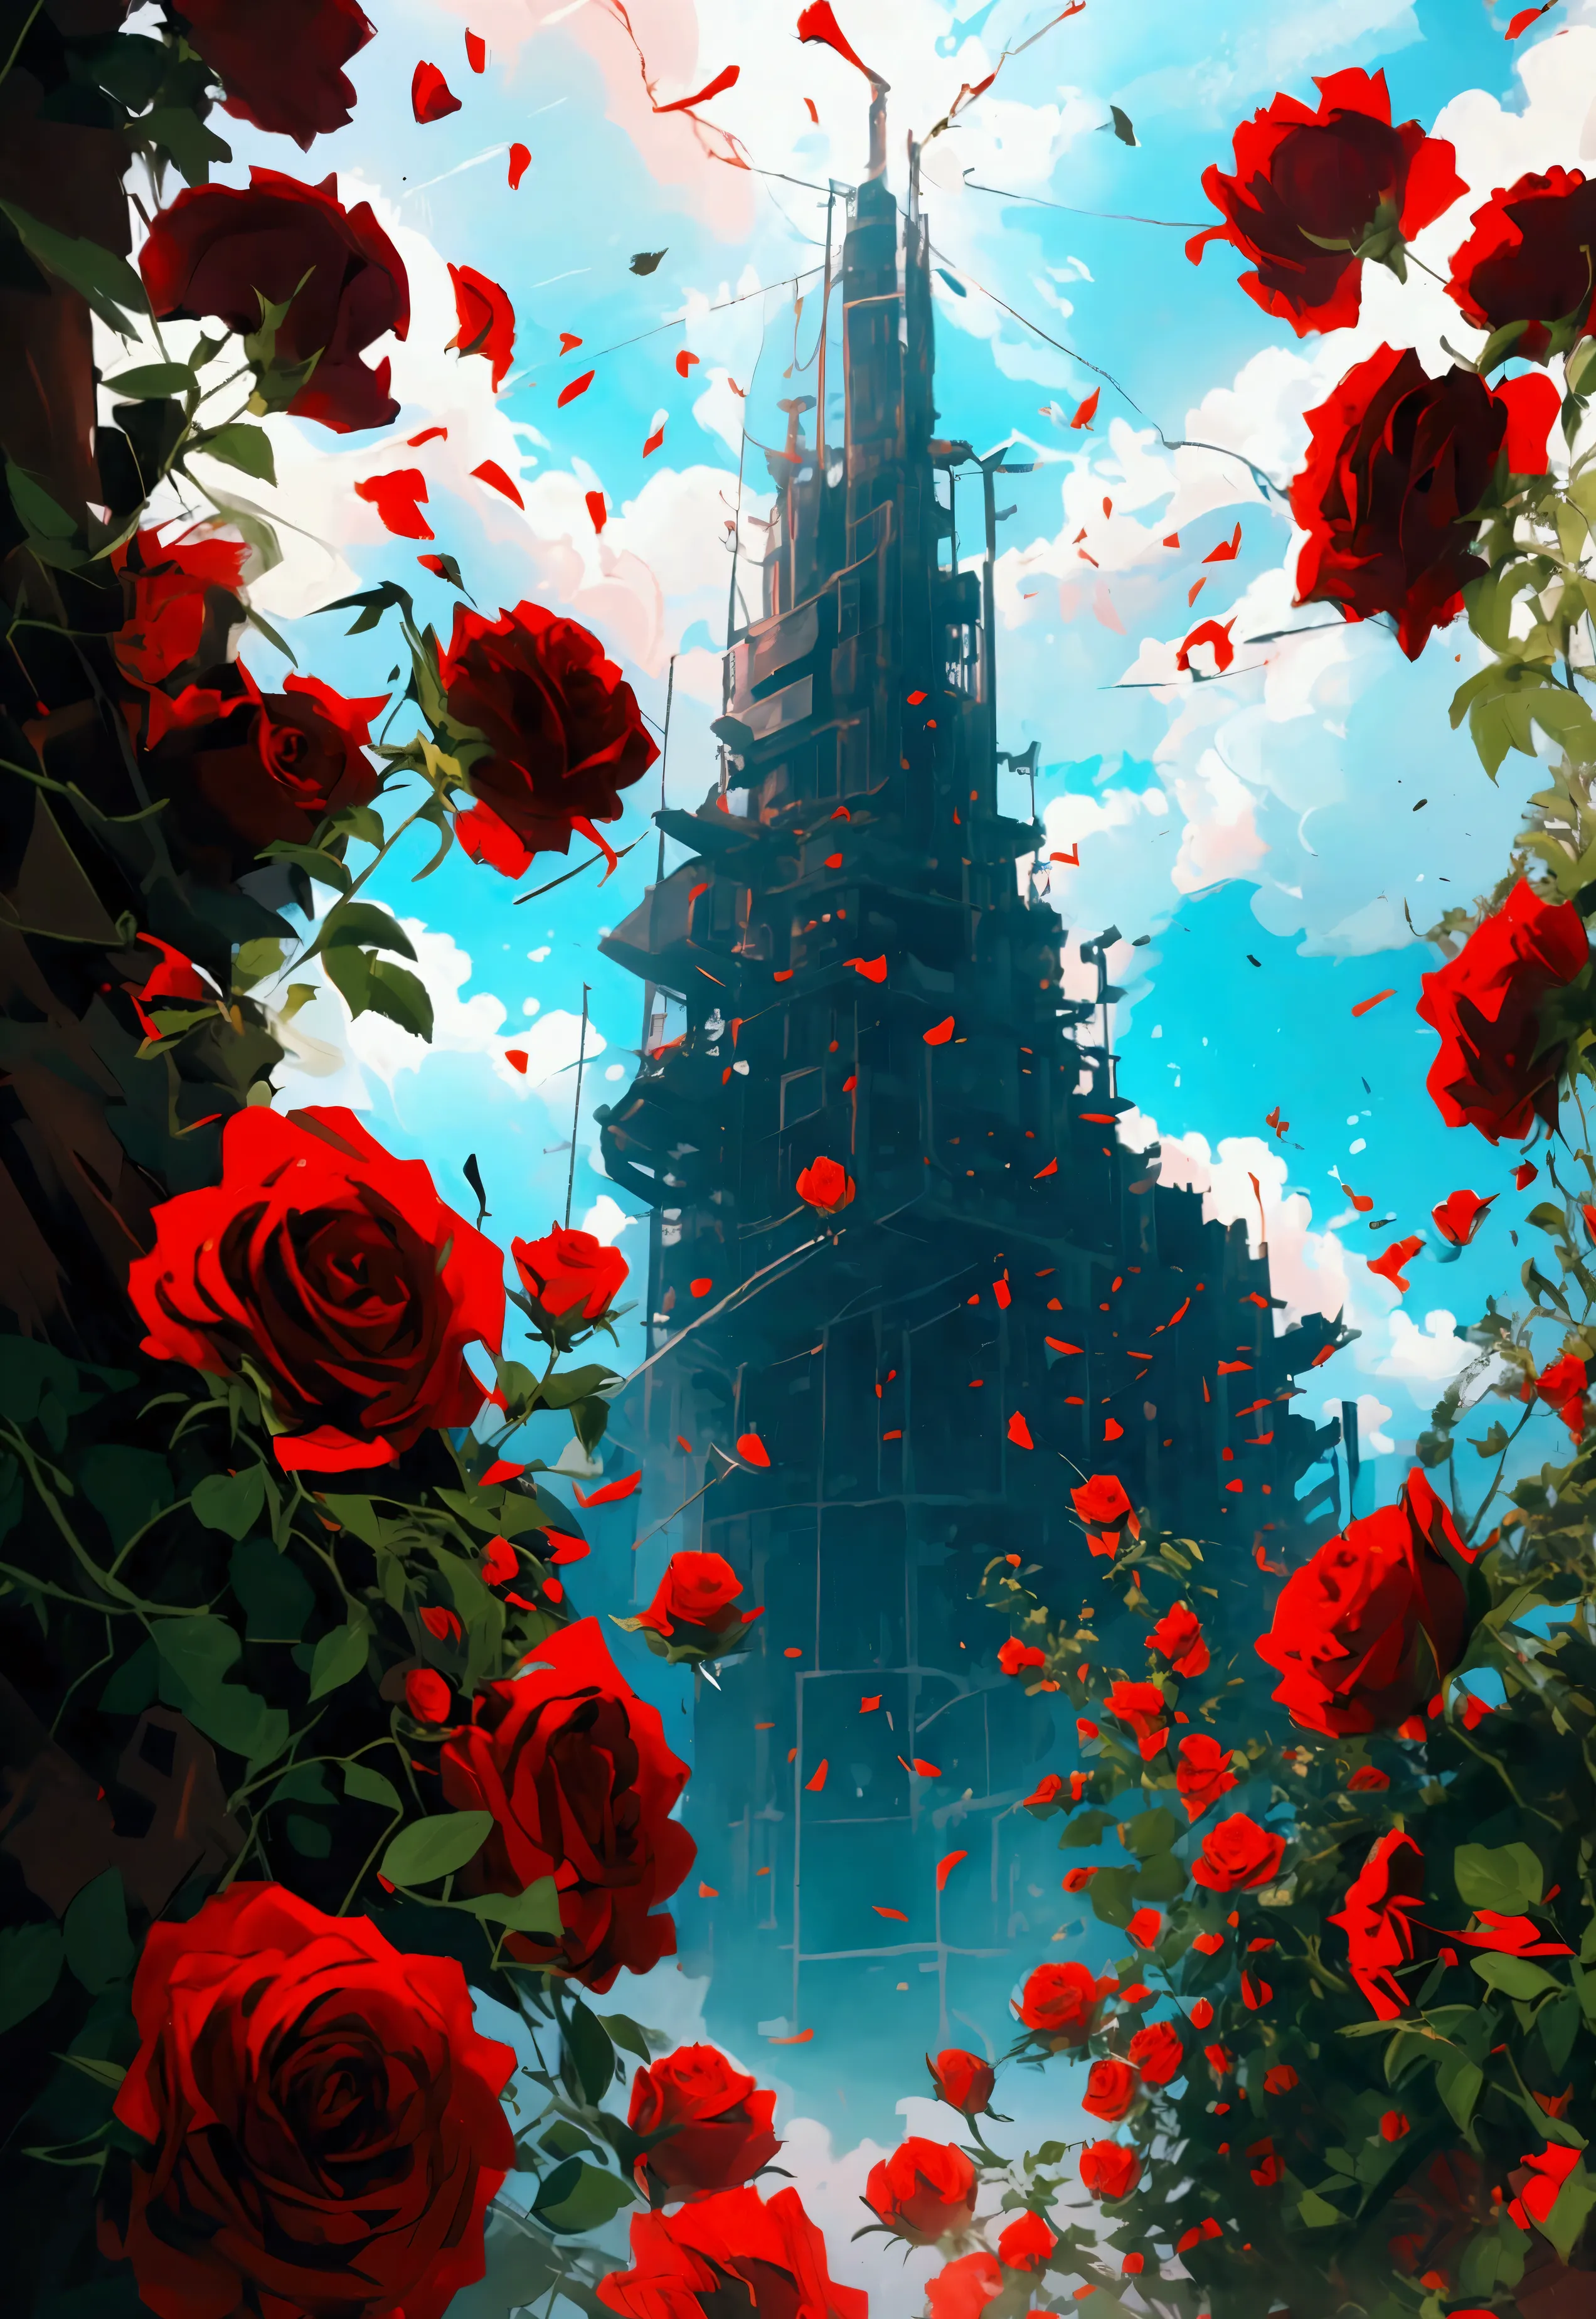 Roses grow lush，Red particles were floating in the sky，A skyscraper filled with vines，Wilderness Wind，Apocalyptic